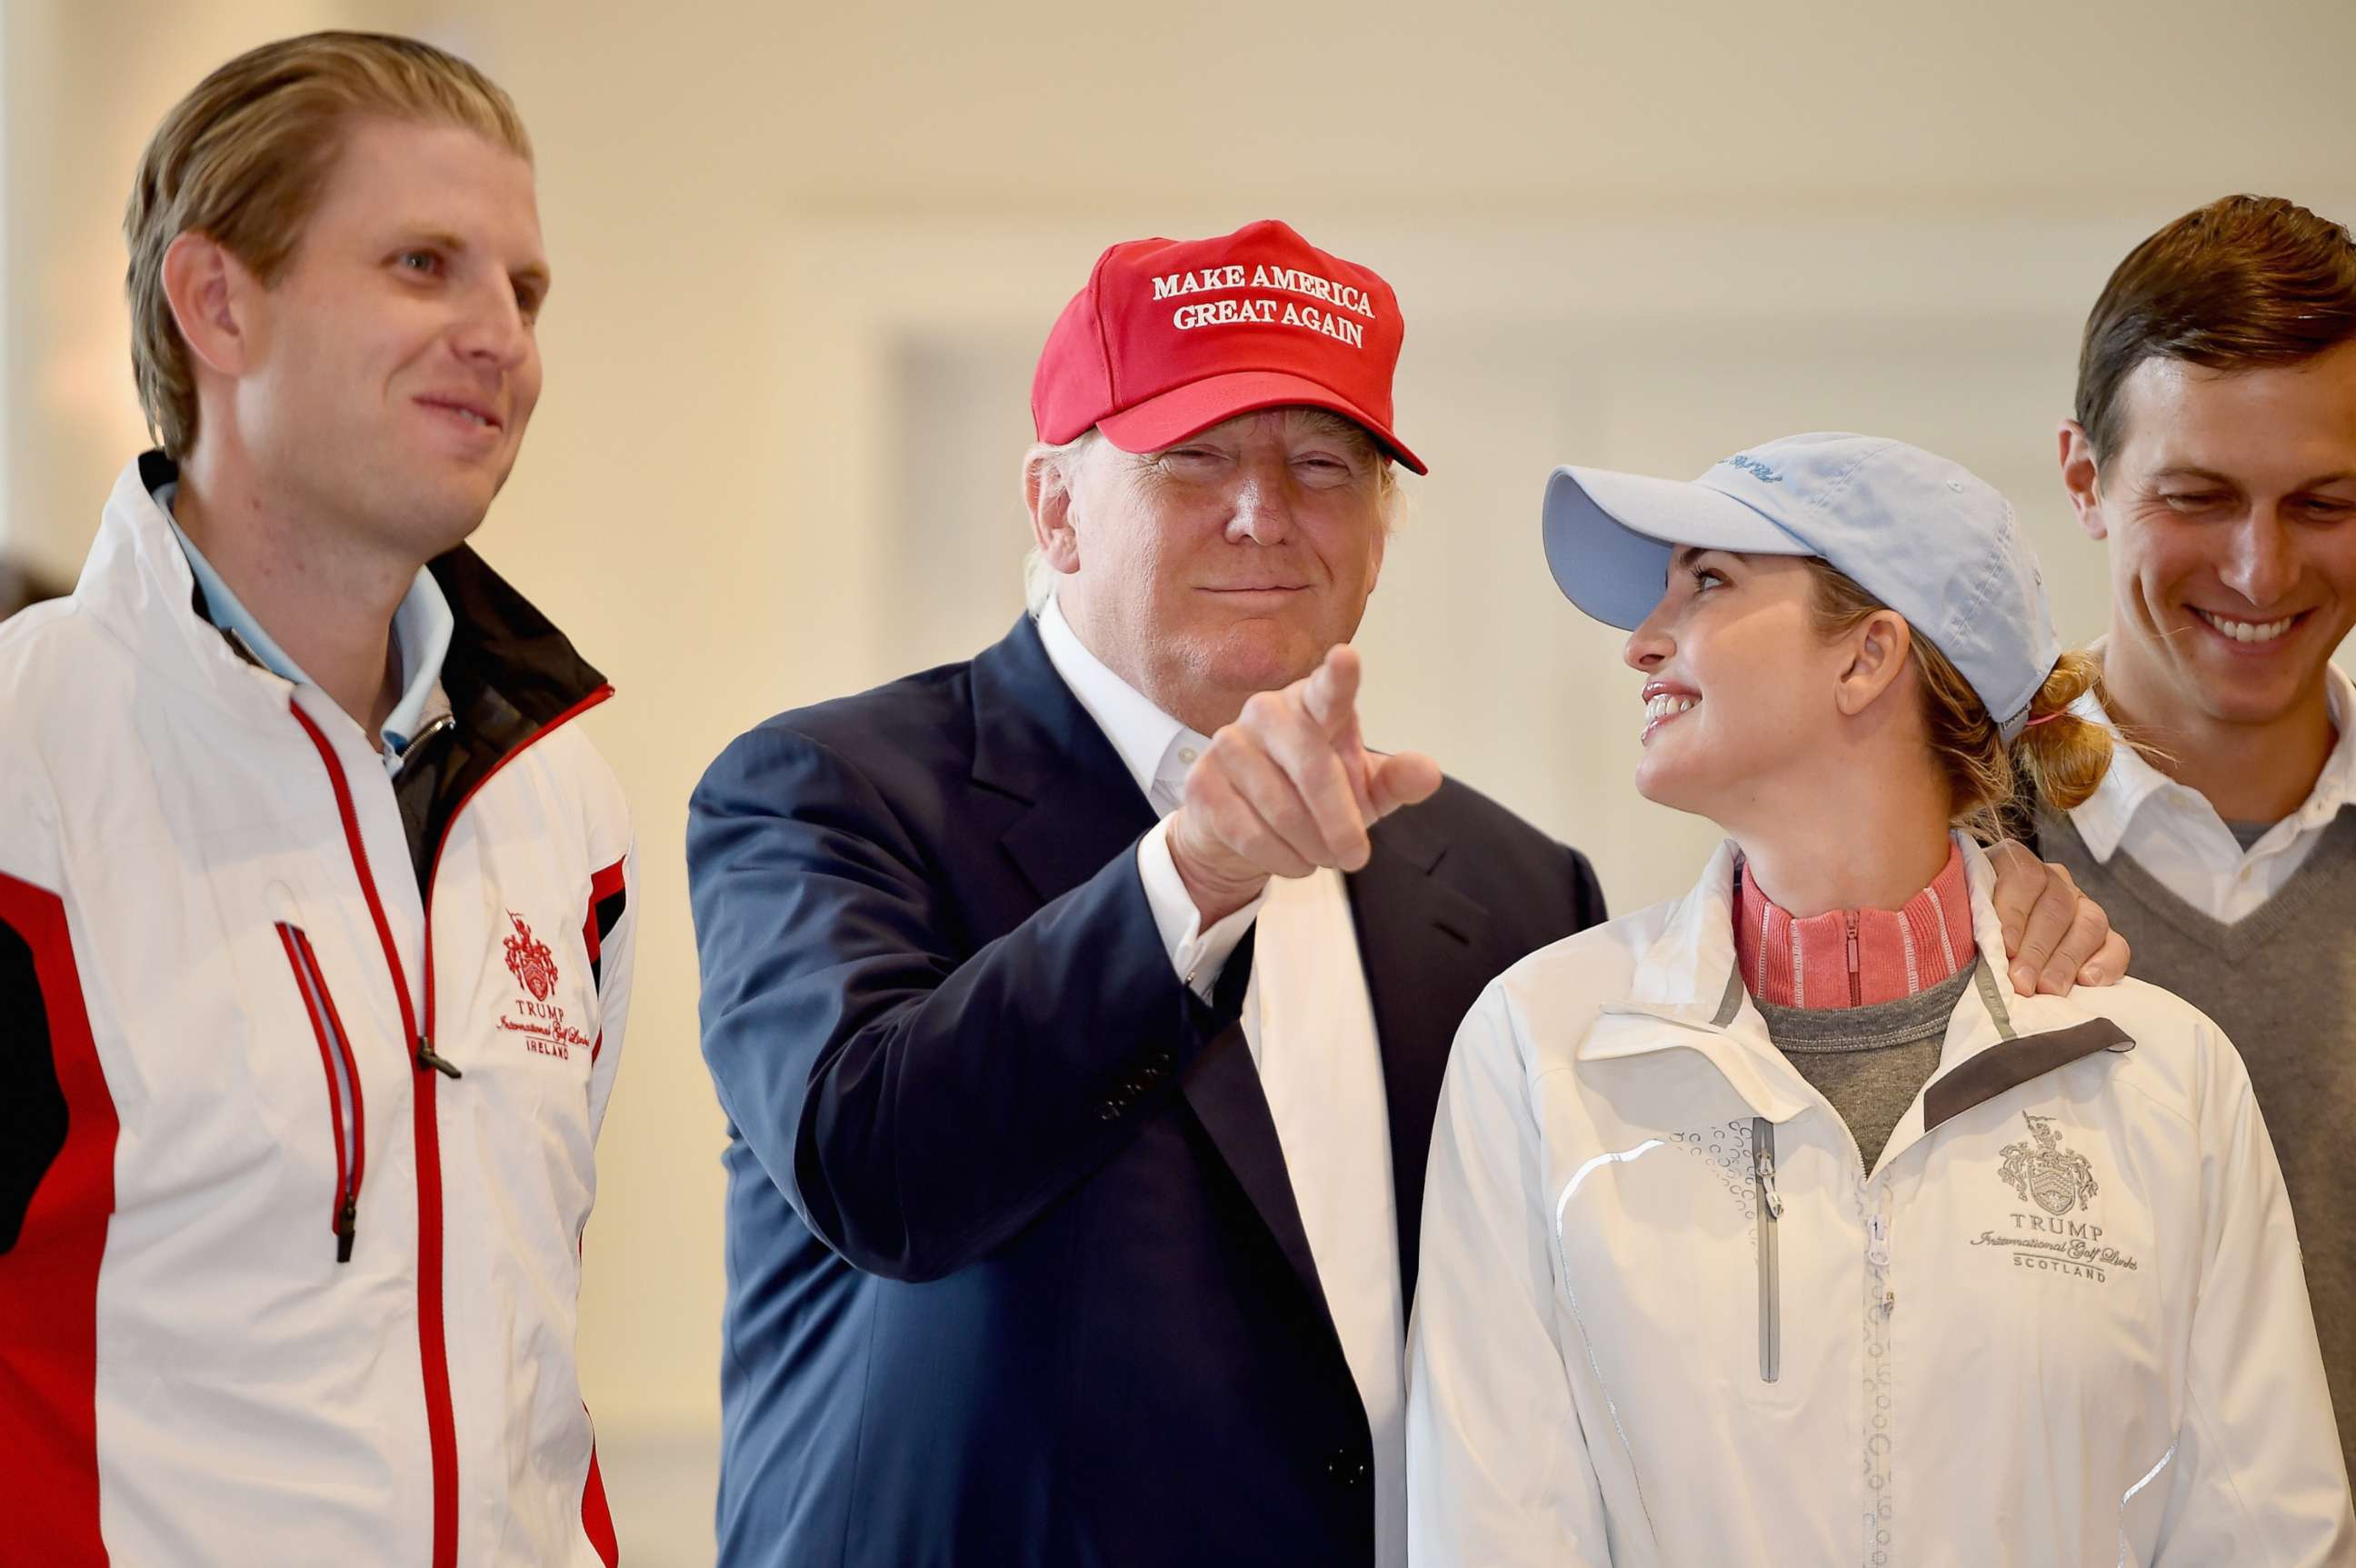 PHOTO: Donald Trump visits his Scottish golf course Turnberry with his children Ivanka Trump and Eric Trump on July 30, 2015 in Ayr, Scotland. 